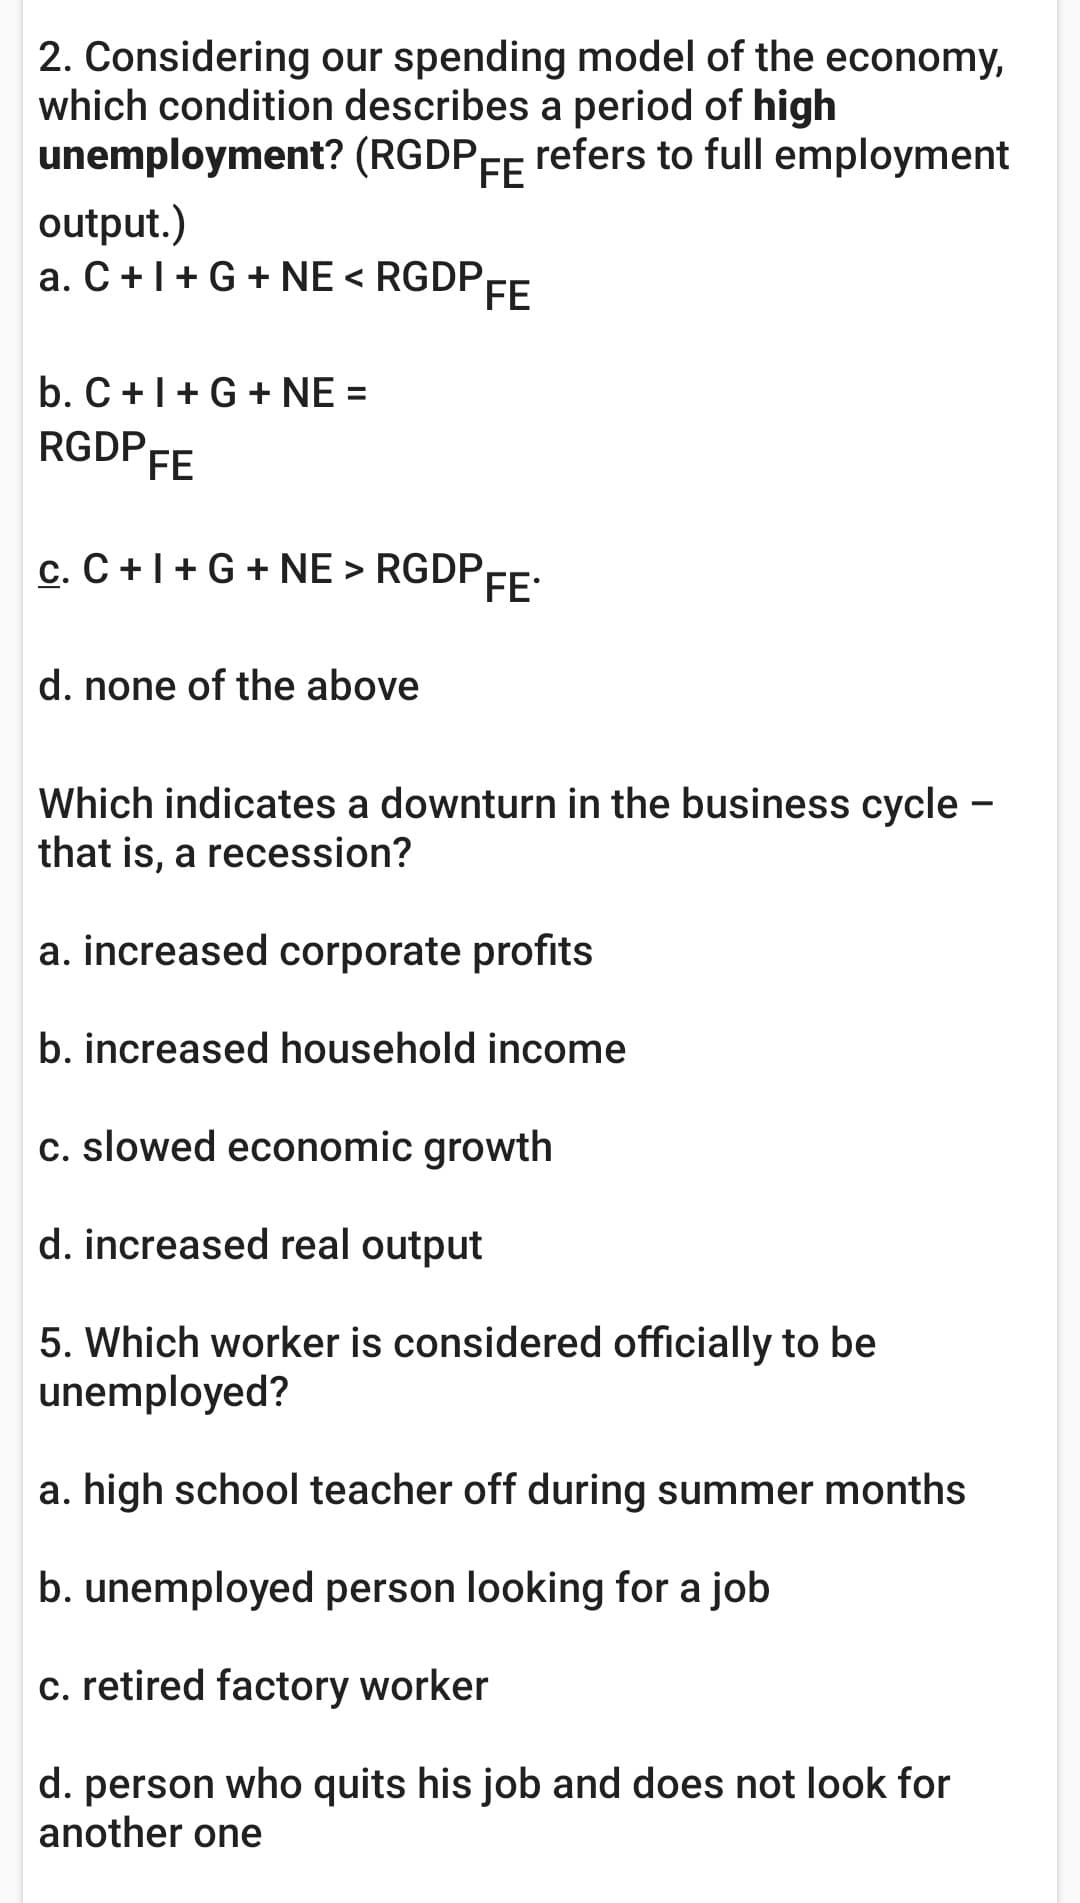 2. Considering our spending model of the economy,
which condition describes a period of high
unemployment? (RGDPFE
refers to full employment
output.)
a. C +|+ G + NE < RGDP
FE
b. C+1+G + NE =
RGDP FE
c. C +1+ G + NE > RGDPE:
d. none of the above
Which indicates a downturn in the business cycle -
that is, a recession?
a. increased corporate profits
b. increased household income
c. slowed economic growth
d. increased real output
5. Which worker is considered officially to be
unemployed?
a. high school teacher off during summer months
b. unemployed person looking for a job
c. retired factory worker
d. person who quits his job and does not look for
another one
